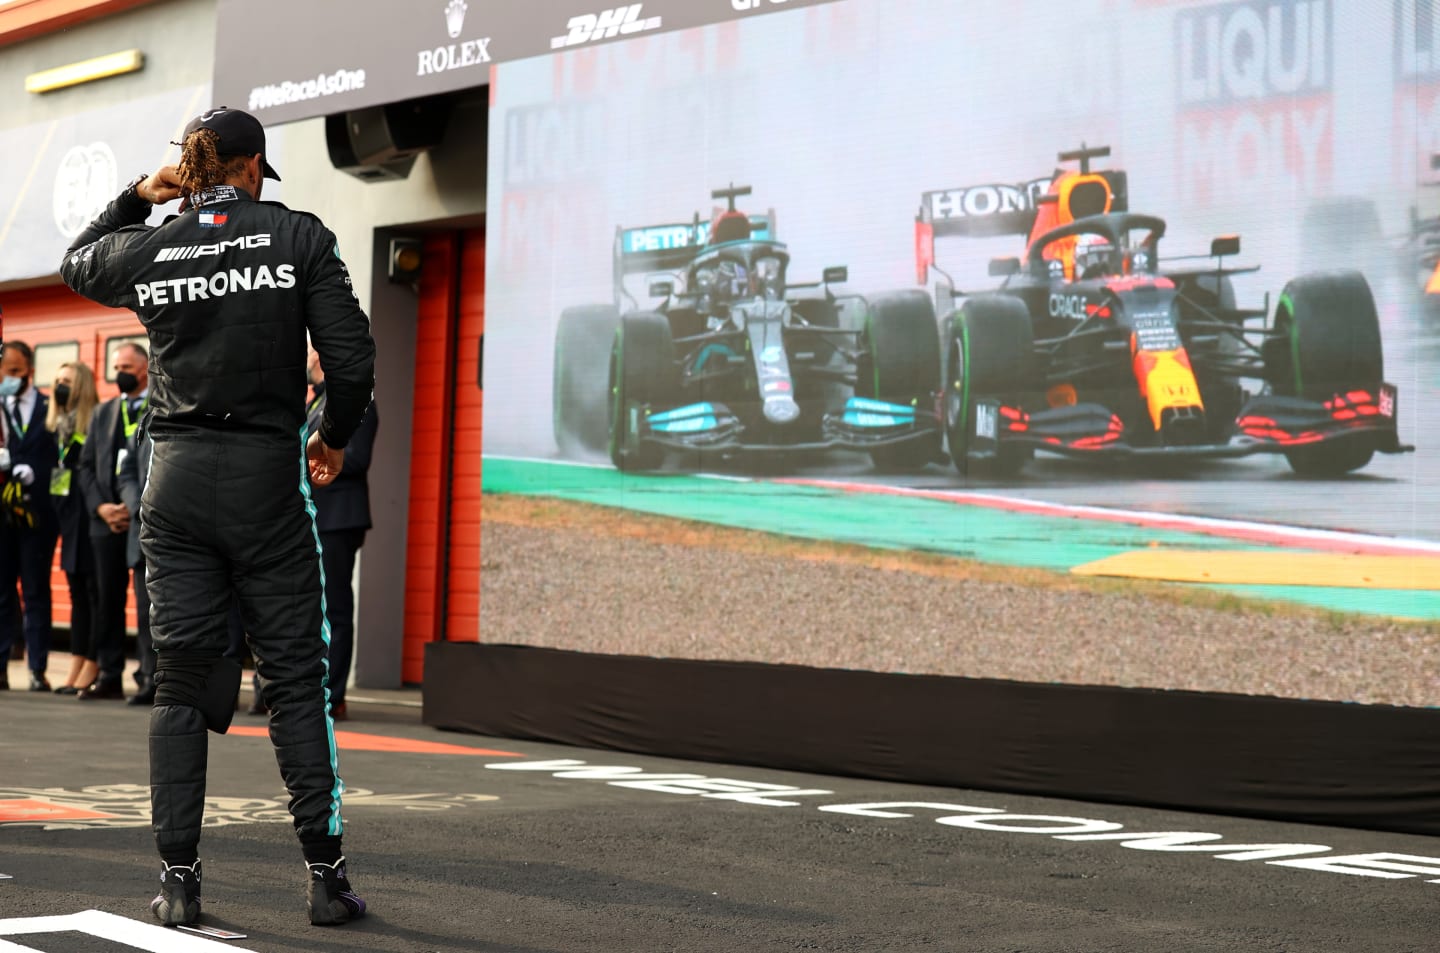 IMOLA, ITALY - APRIL 18: Second placed Lewis Hamilton of Great Britain and Mercedes GP watches a replay of the start of the race on a screen in parc ferme after the F1 Grand Prix of Emilia Romagna at Autodromo Enzo e Dino Ferrari on April 18, 2021 in Imola, Italy. (Photo by Bryn Lennon/Getty Images)